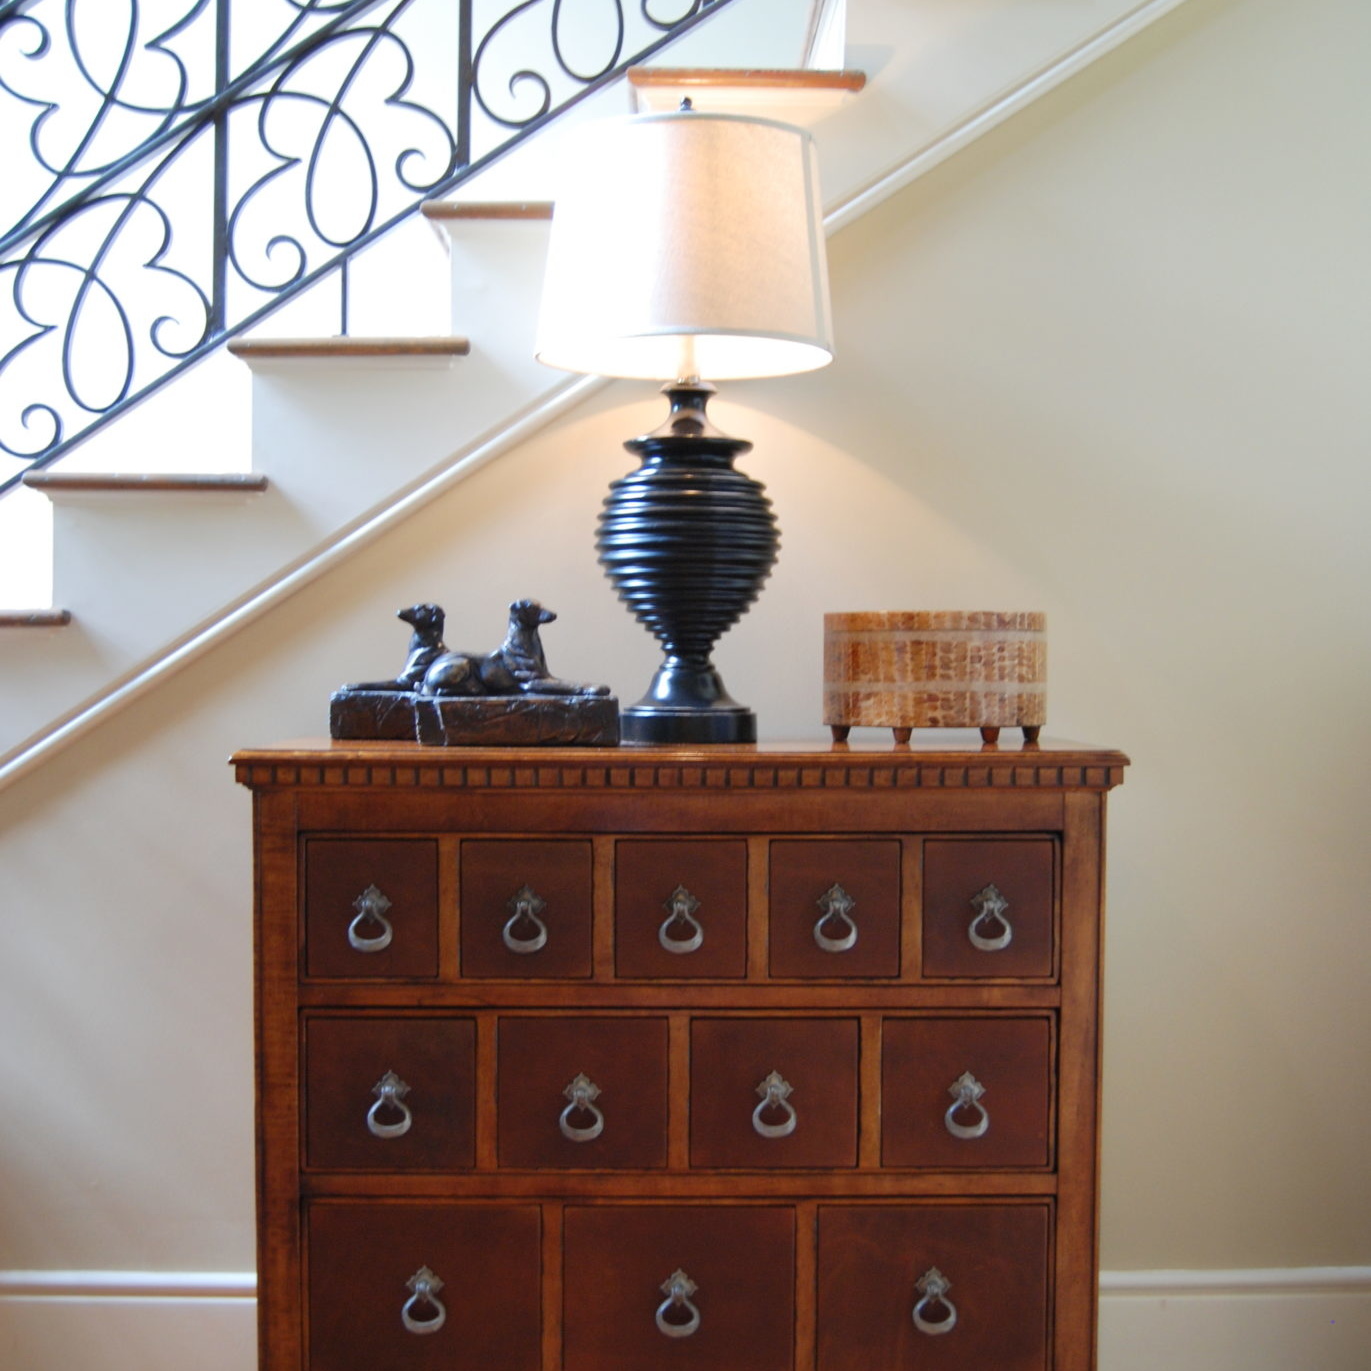 Decorative dresser by a staircase